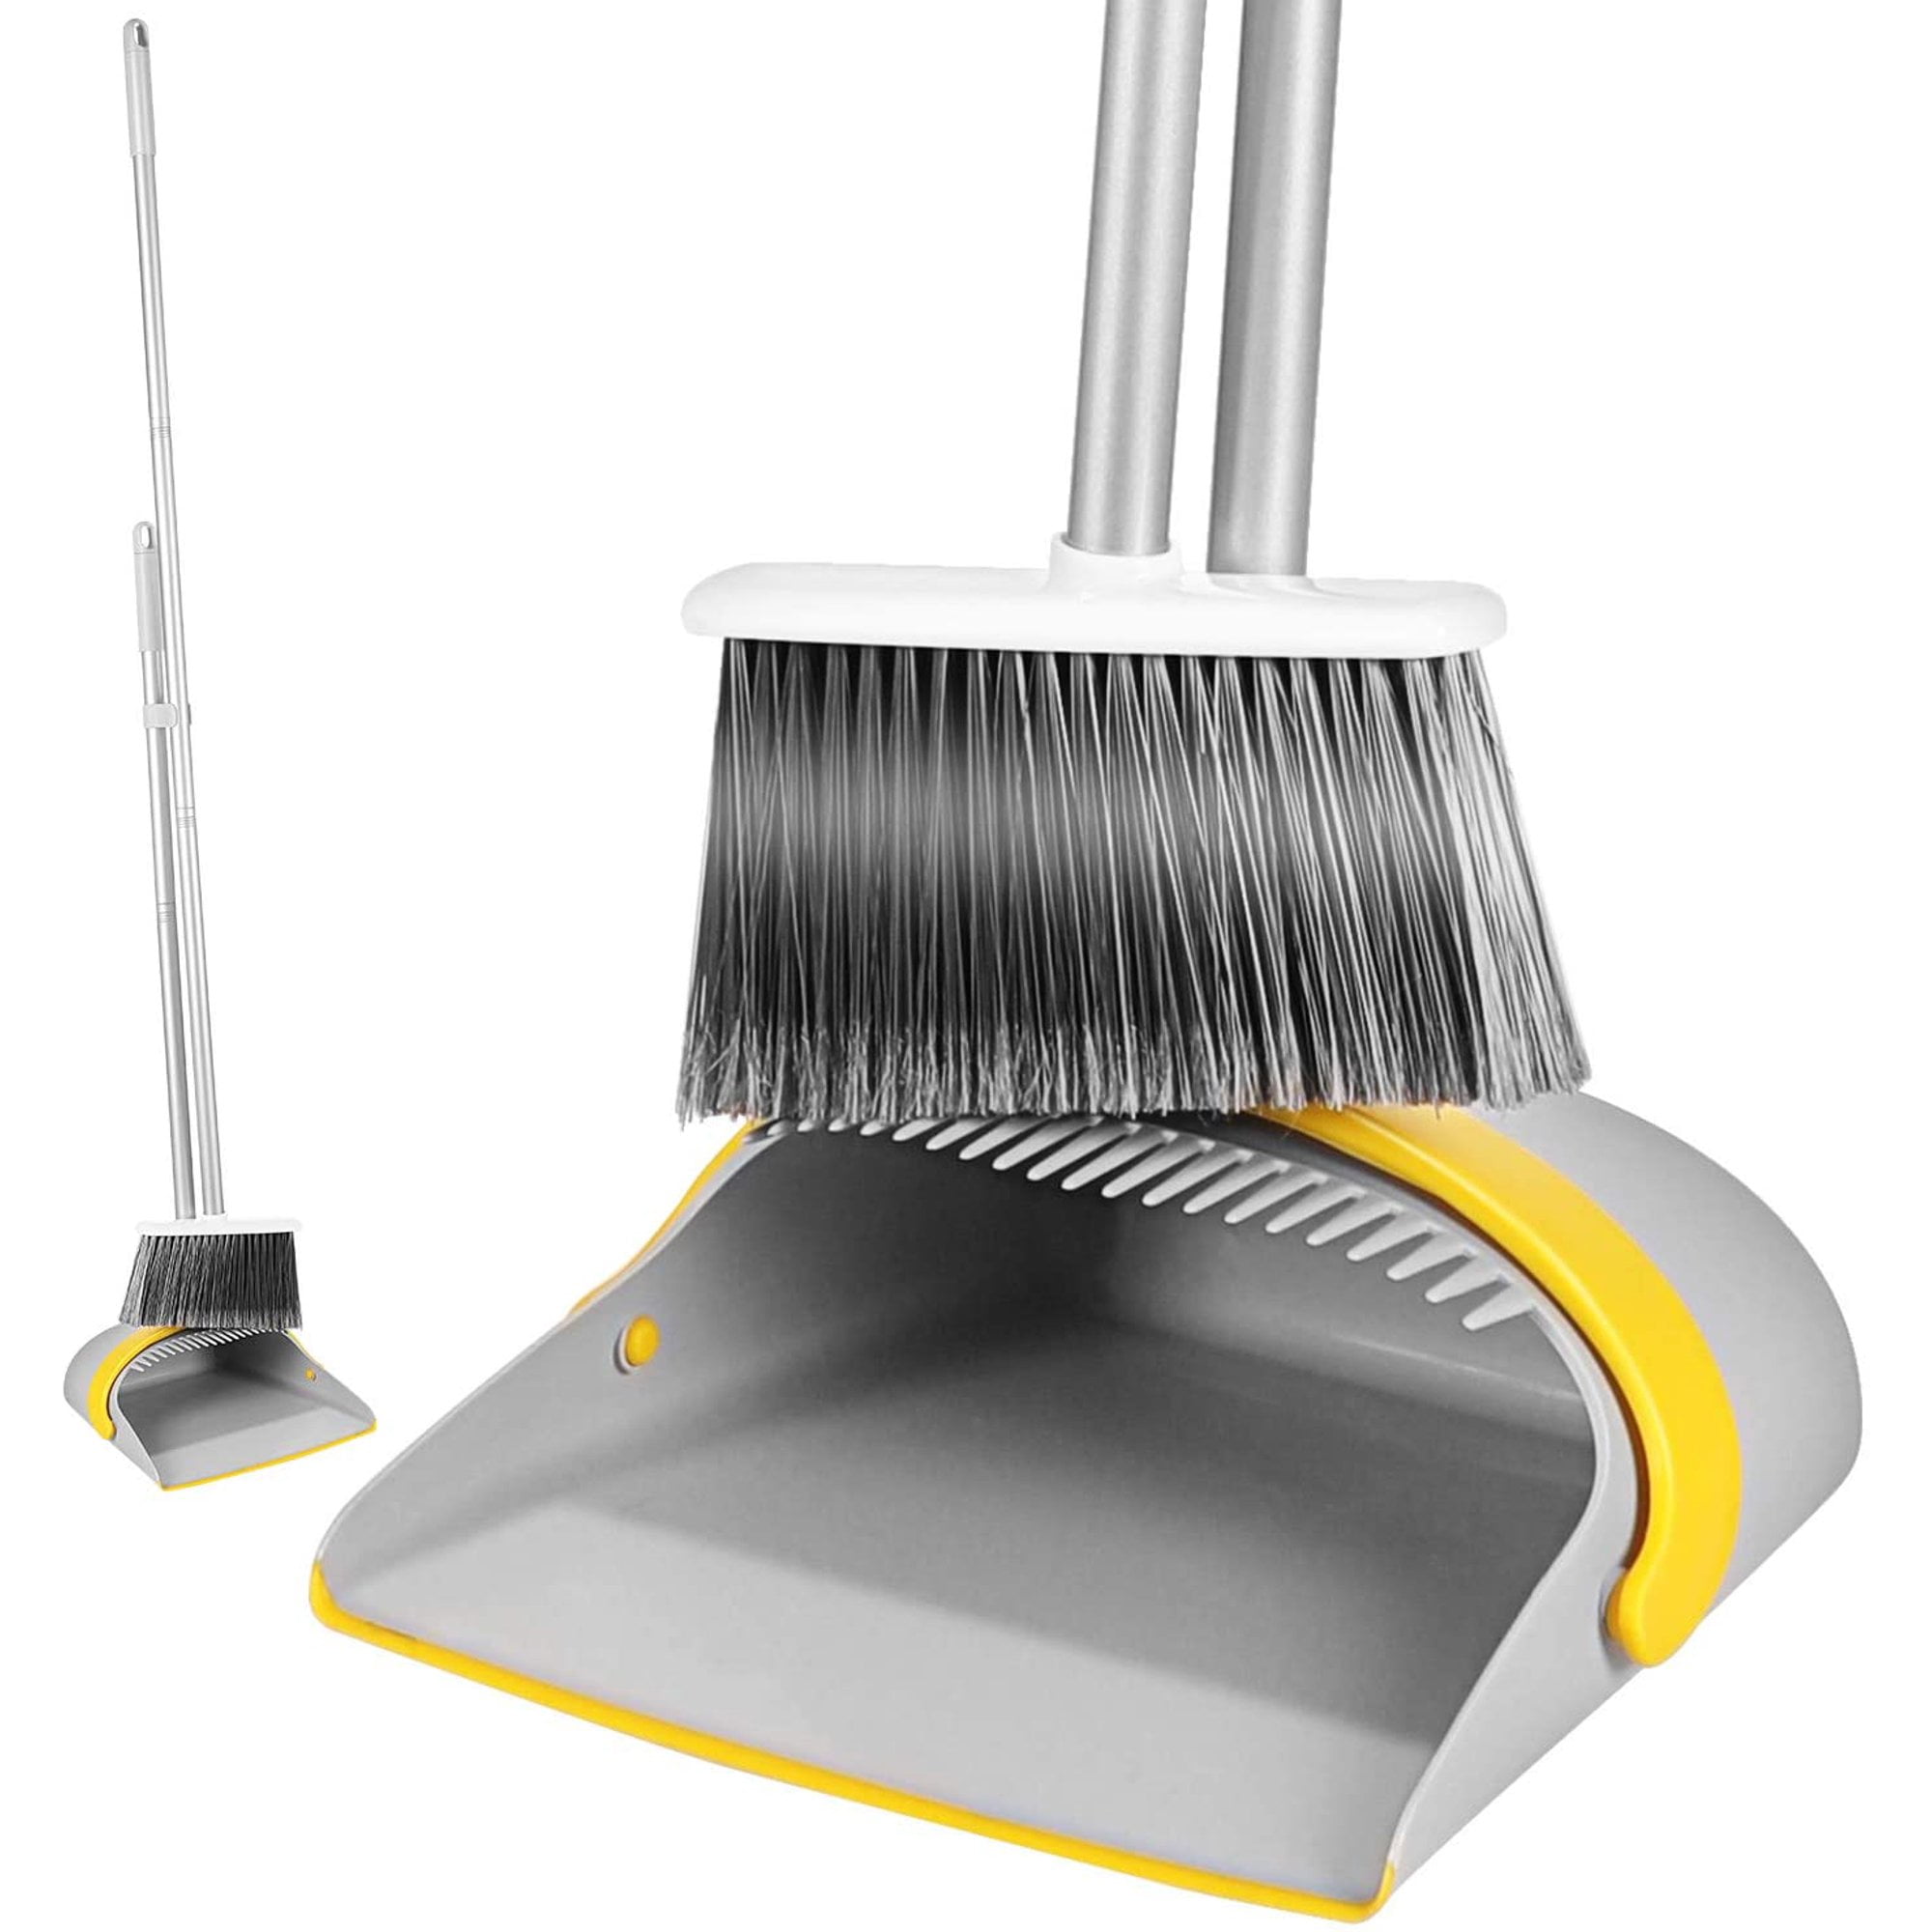 New Cleaning Dustpan Set With Broom And Handle Choose Your Color 